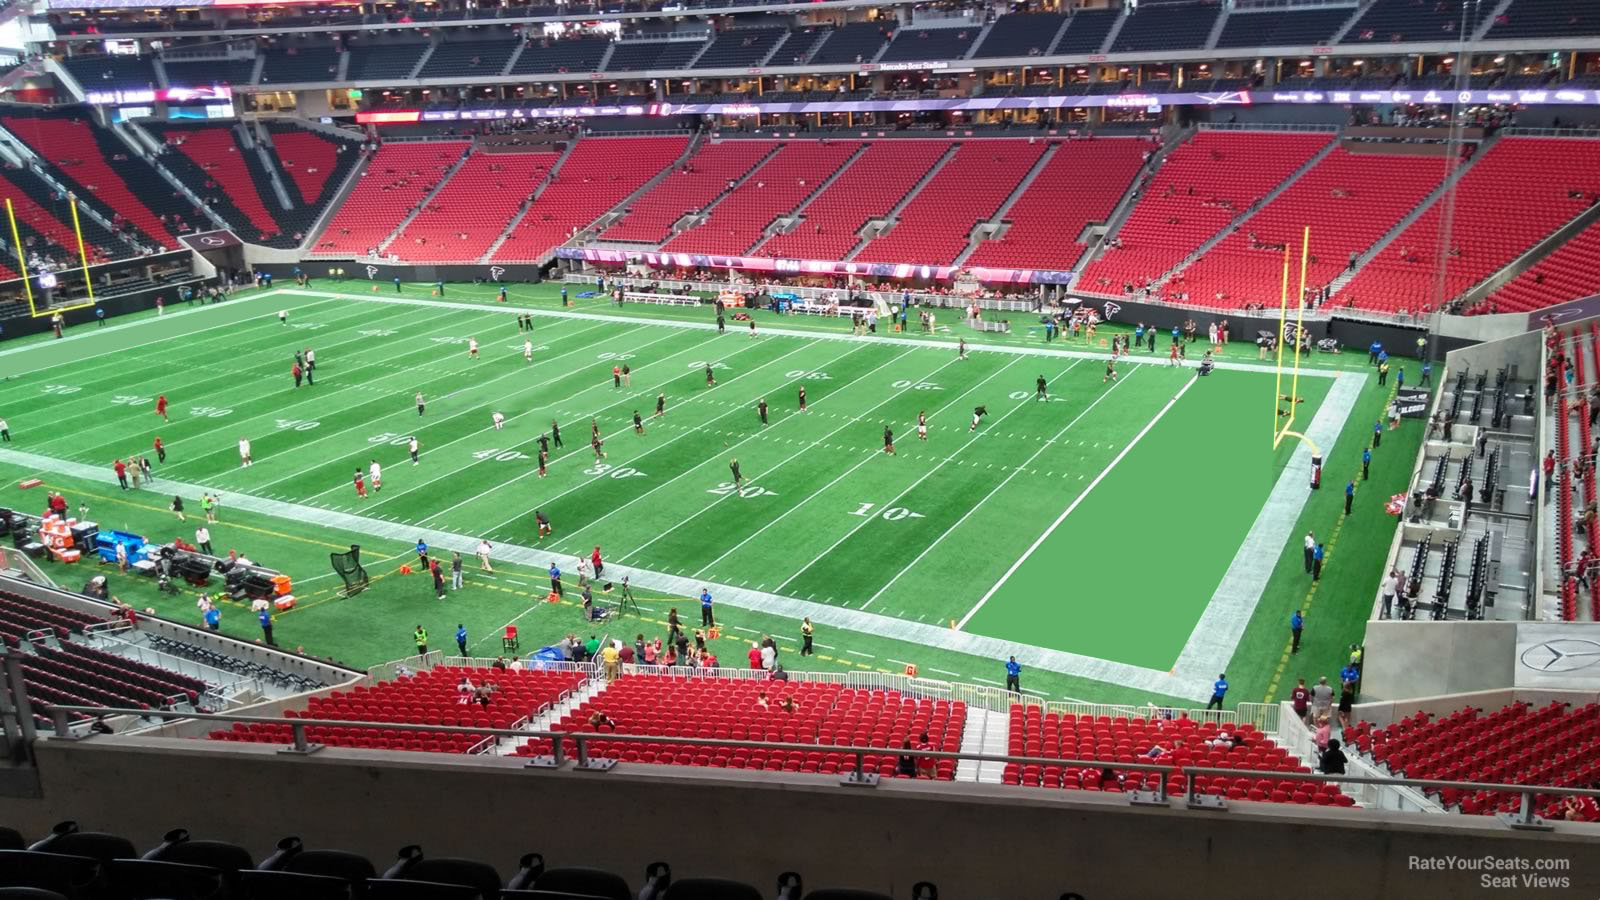 section 231, row 6 seat view  for football - mercedes-benz stadium